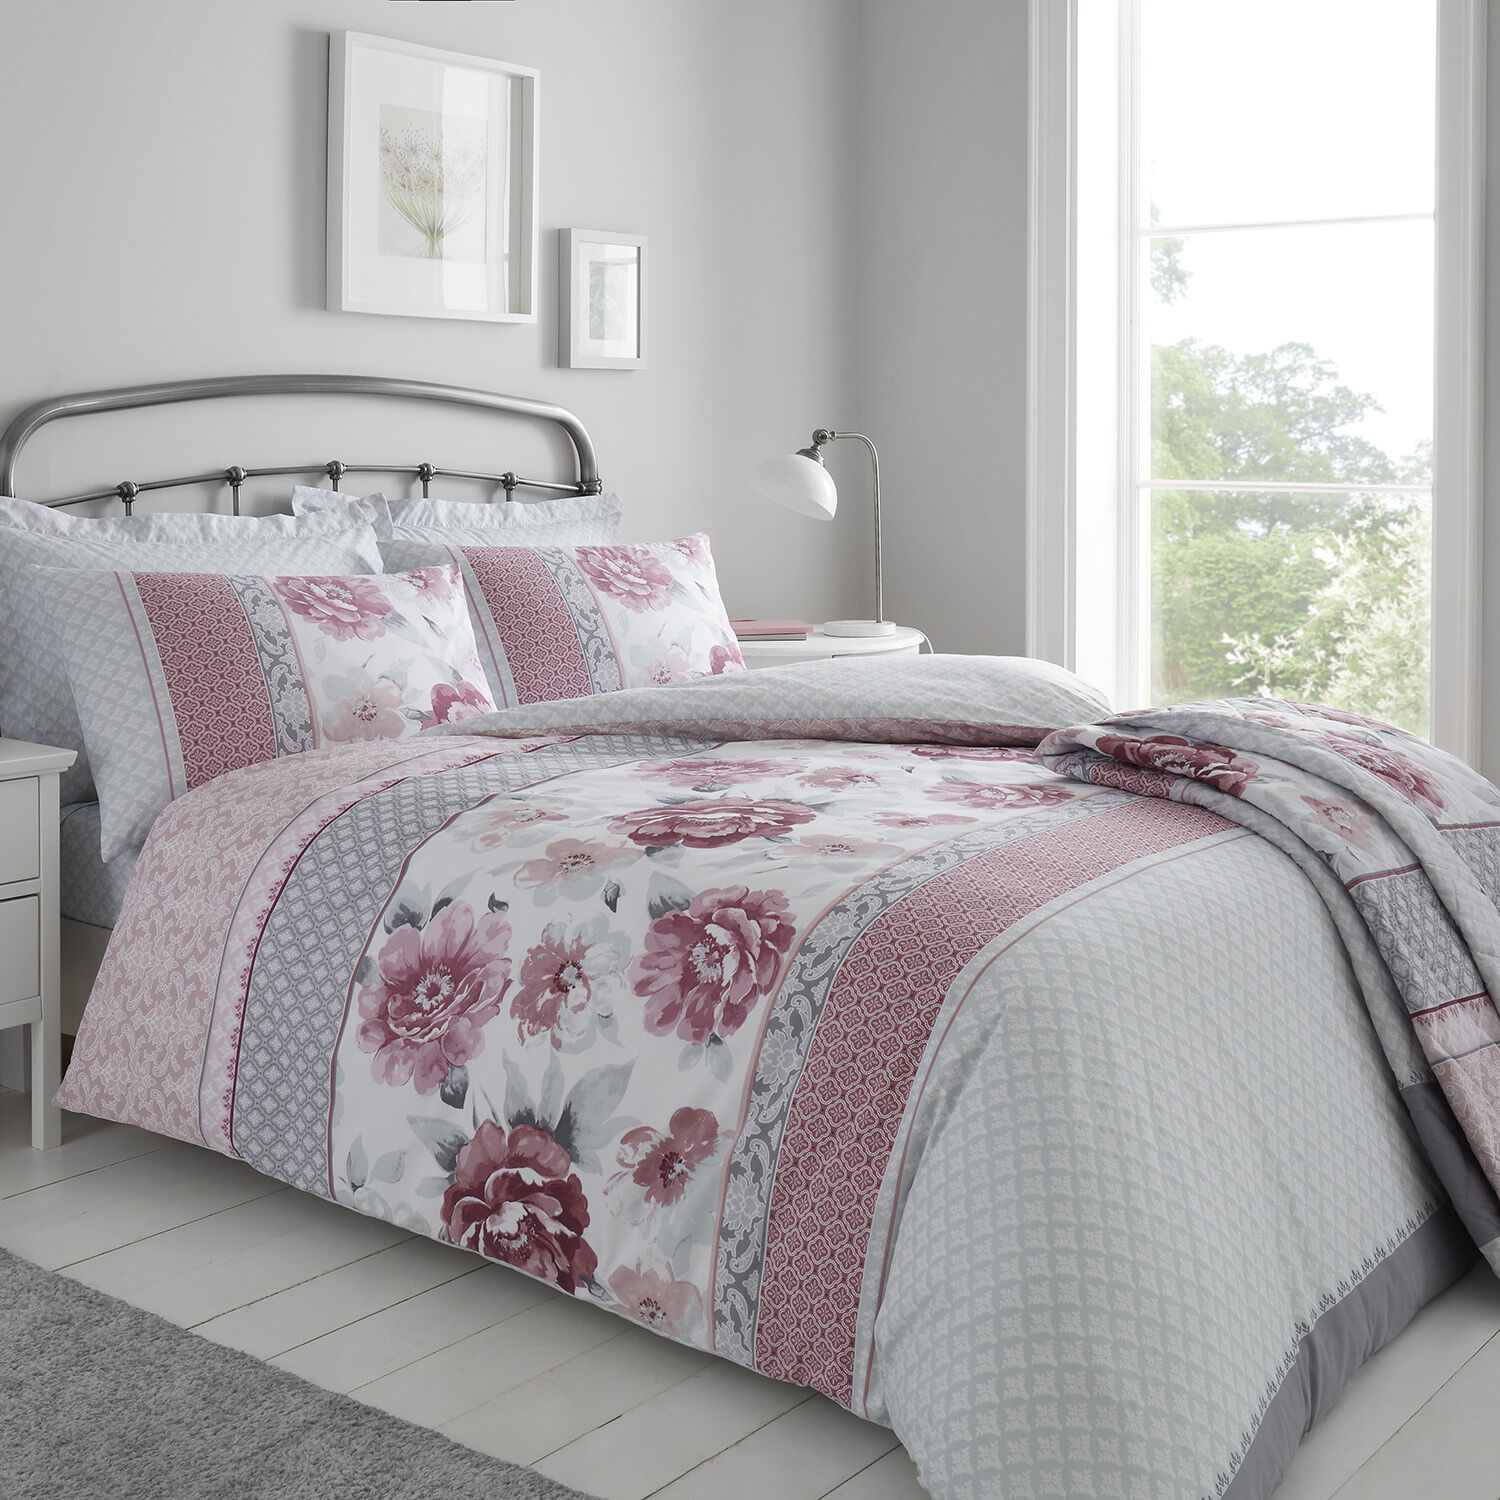 Ophelia Bed Linen Home More, Pink And Grey Duvet Cover